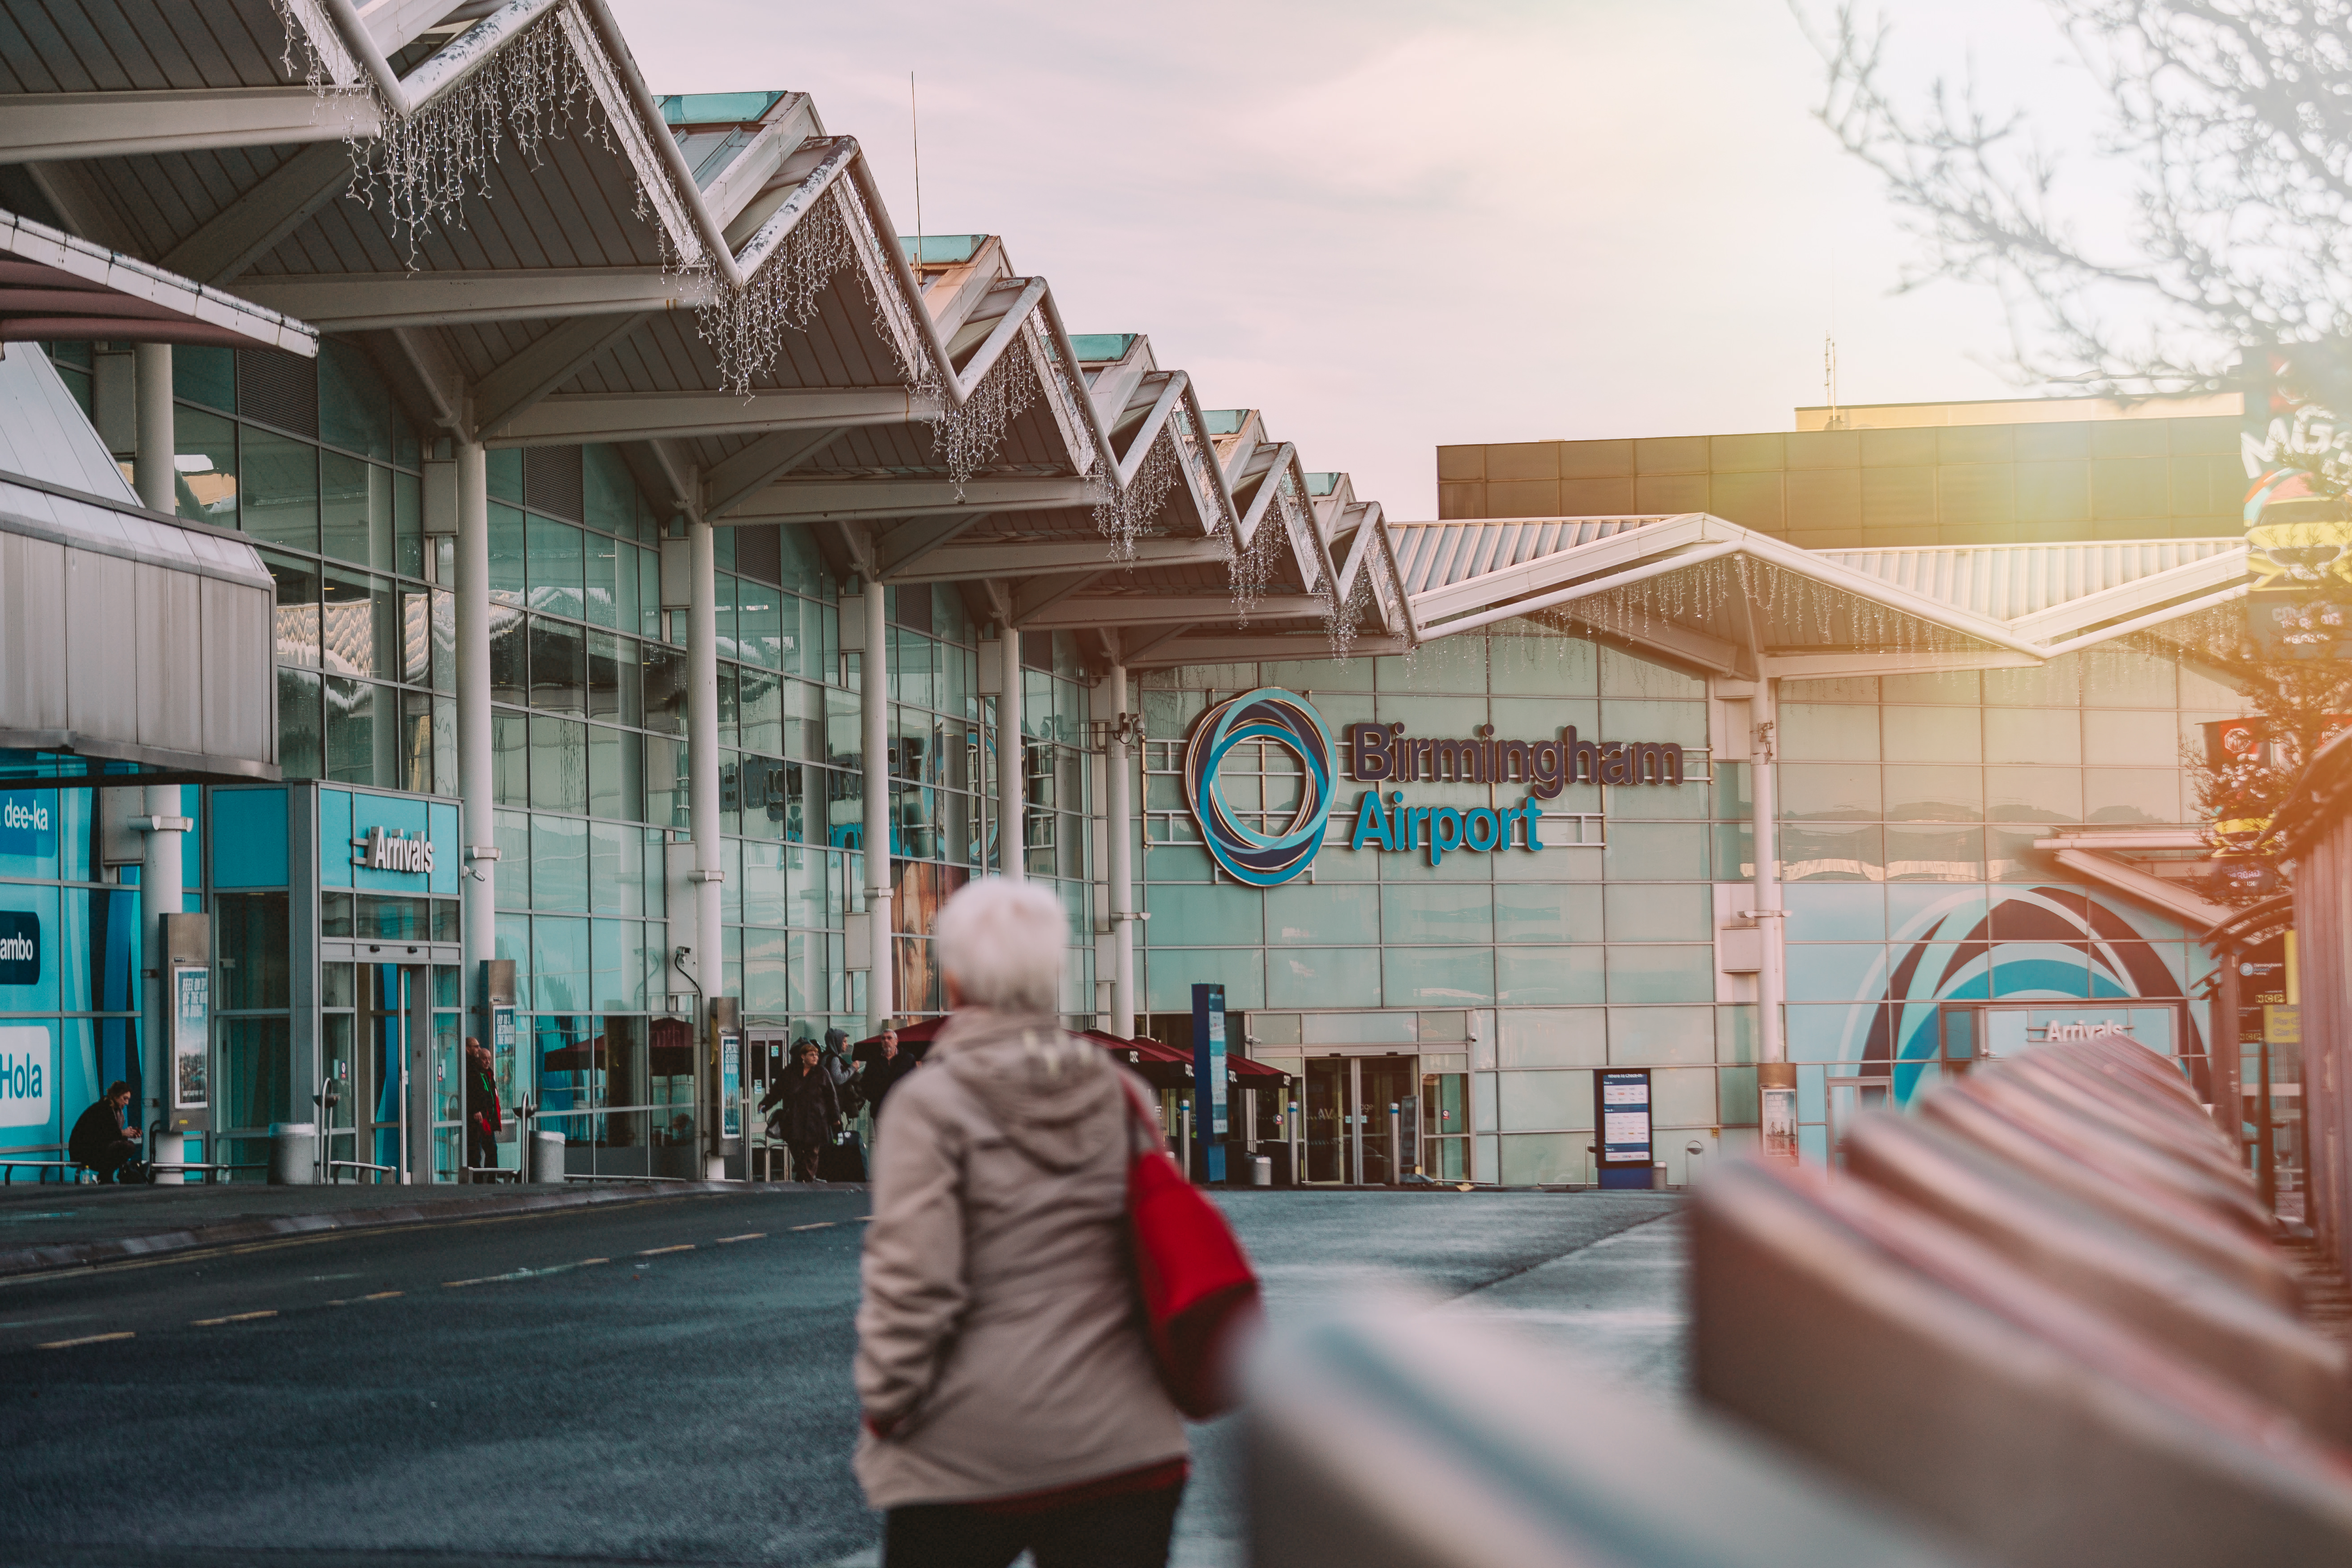 Birmingham Airport employs more than 7,000 people and supports a further 31,000 jobs across the region